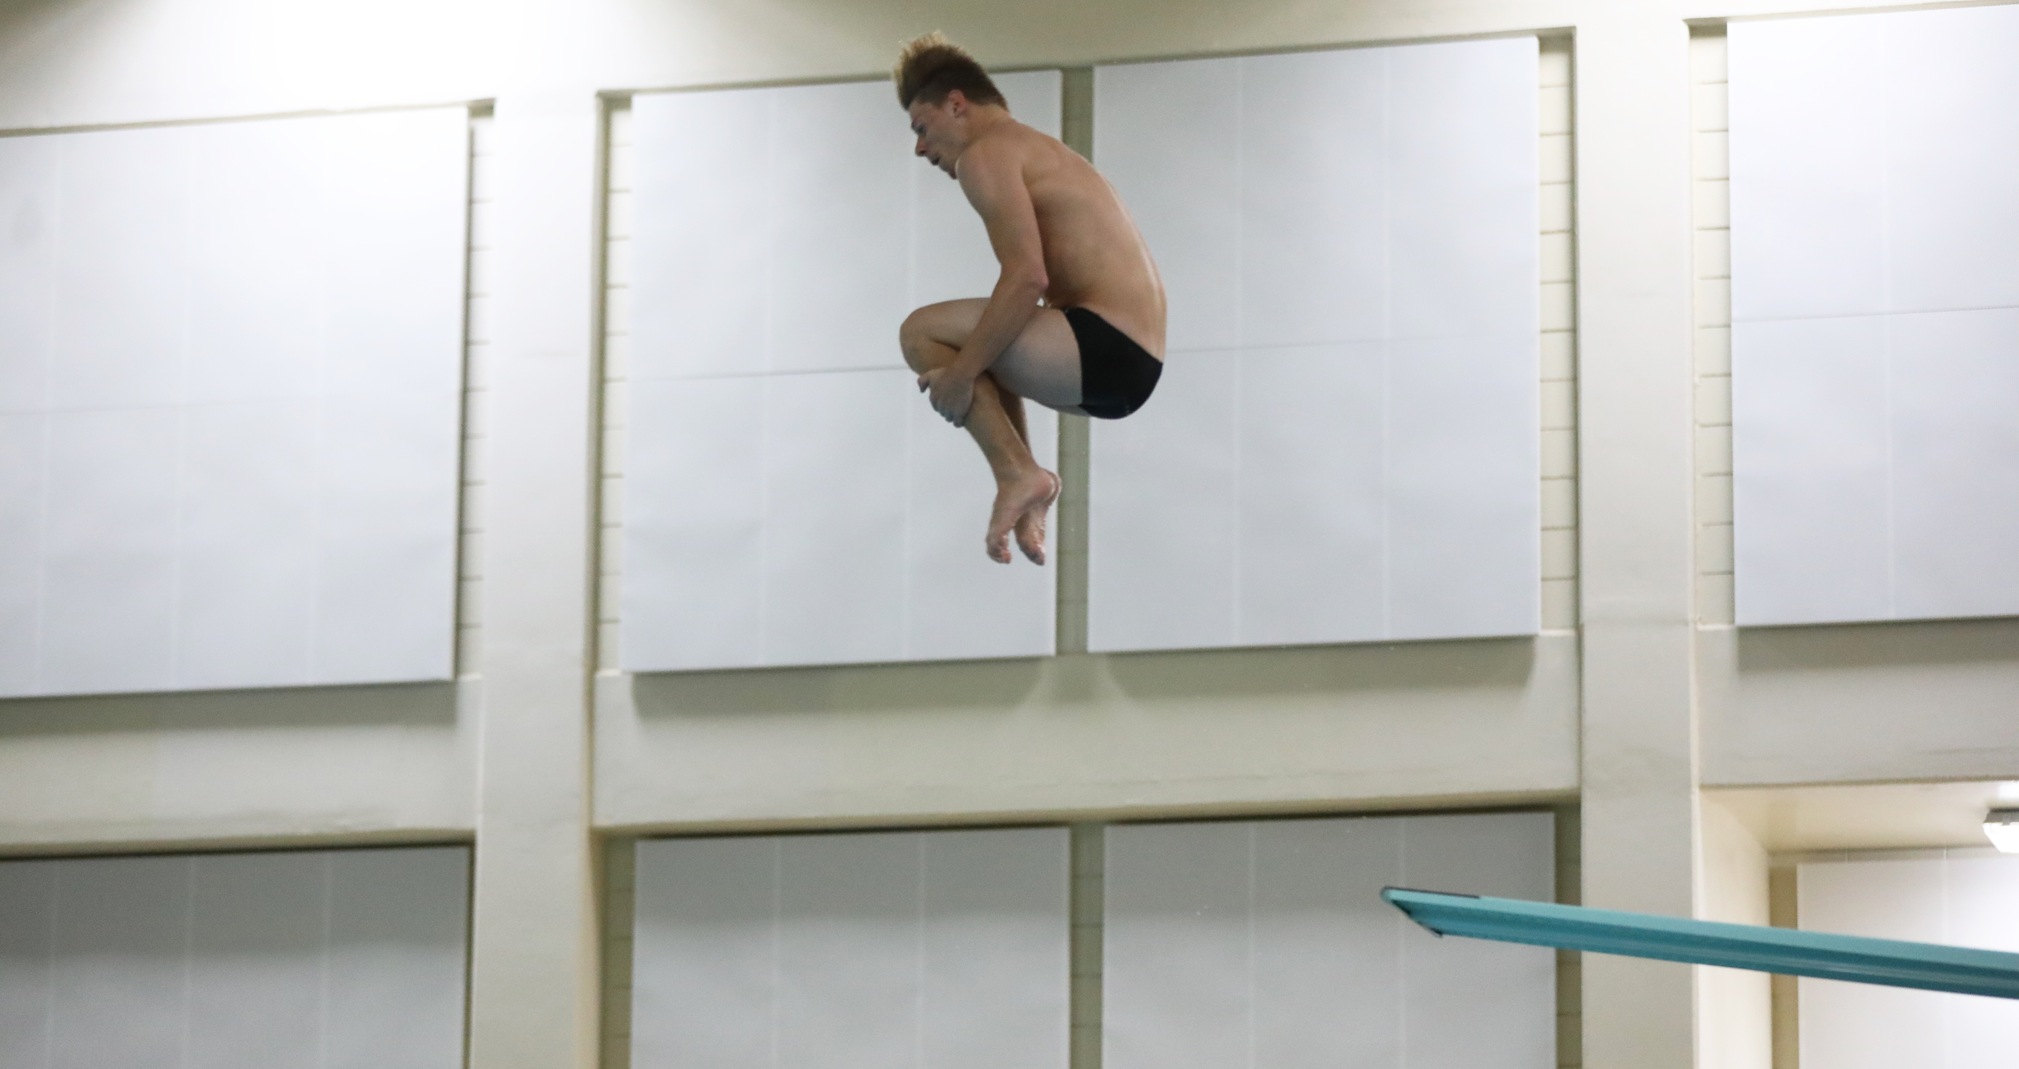 Matt Wilke won both the 1- and 3-meter diving at the Luther College Invitational.